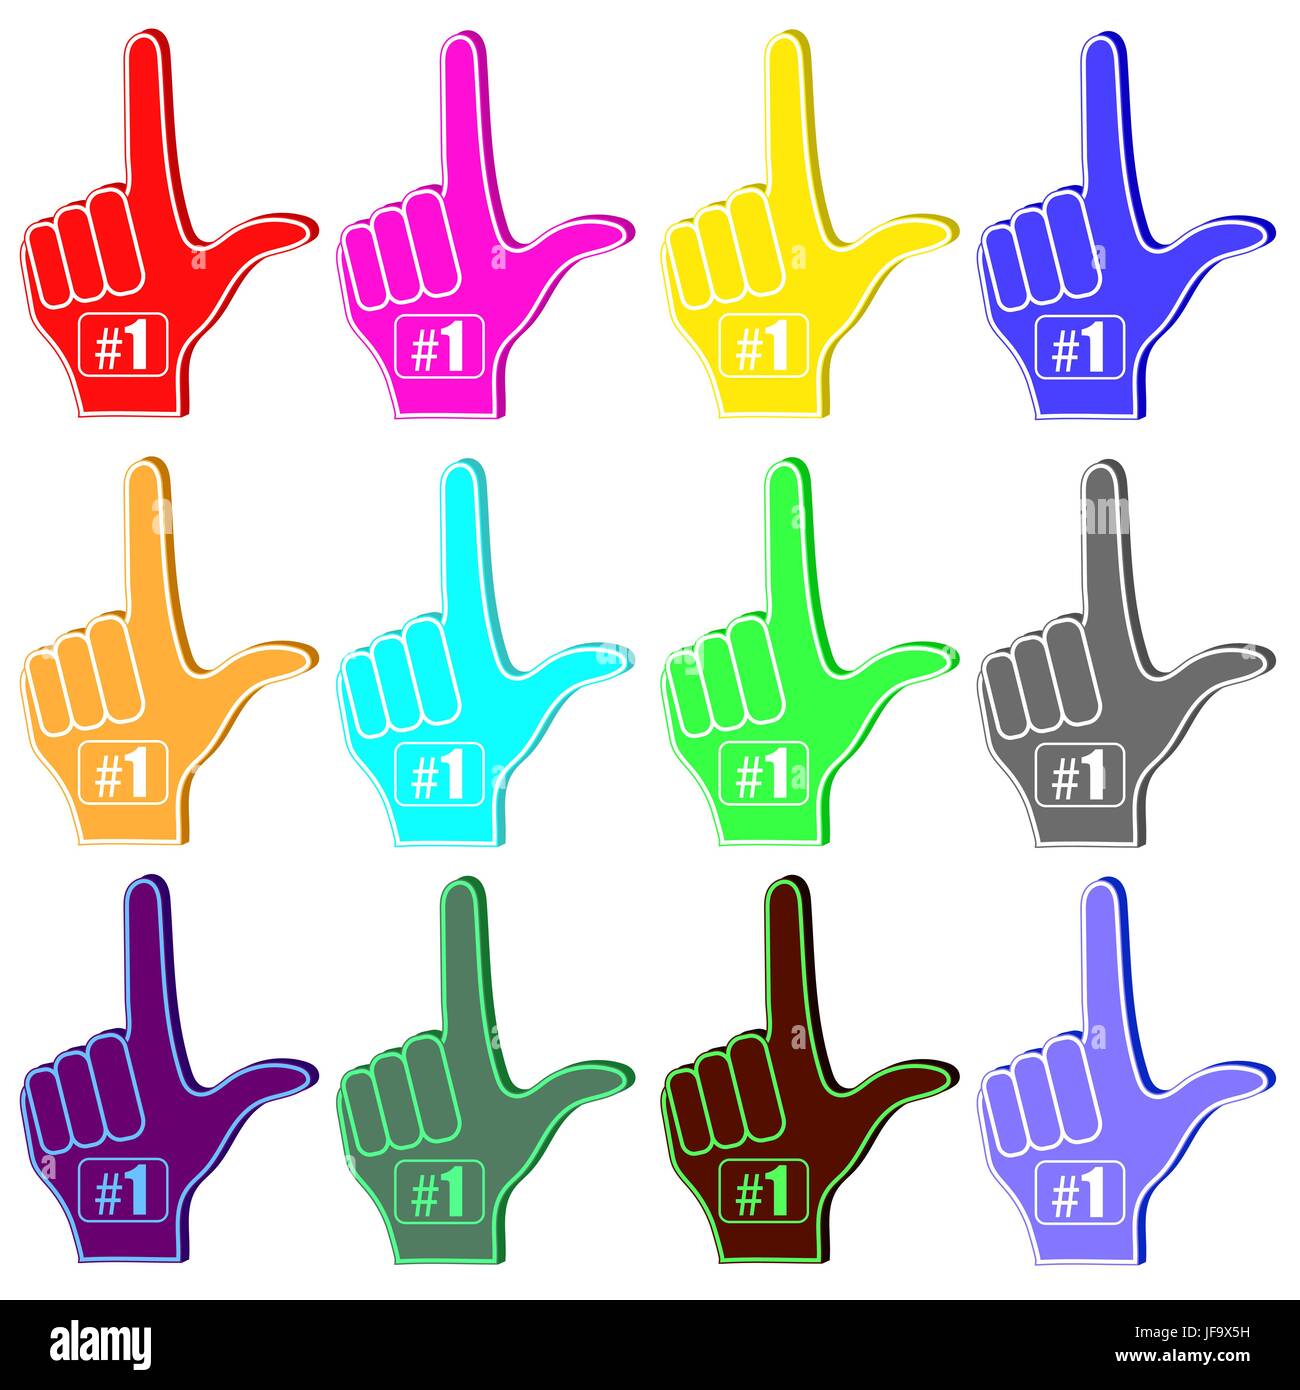 Foam Fingers Silhouettes Isolated on White Background Stock Vector